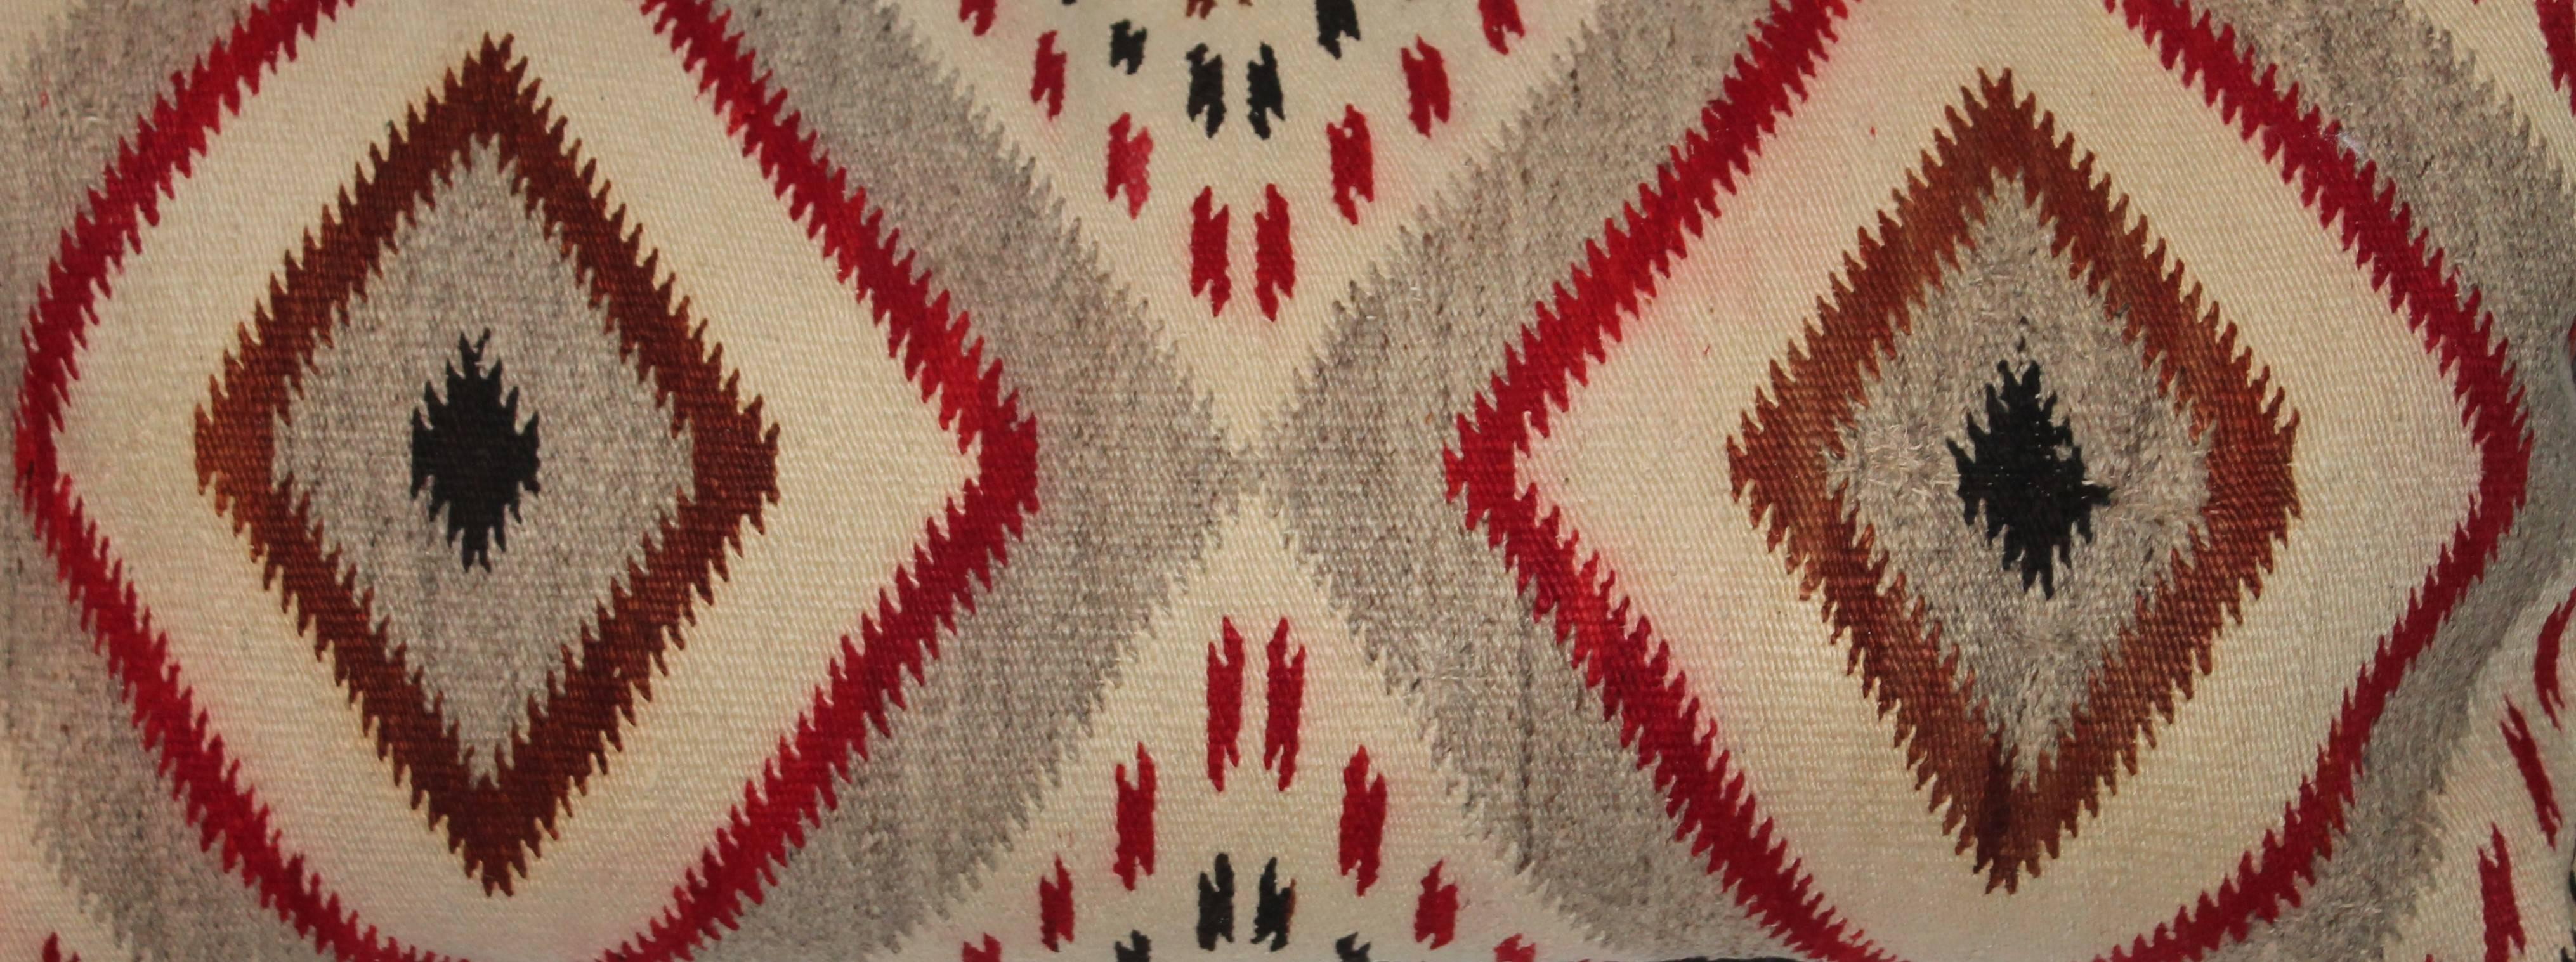 Navajo Indian weaving bolster pillow with a wonderful saw tooth pattern. The backing is in a black cotton linen.